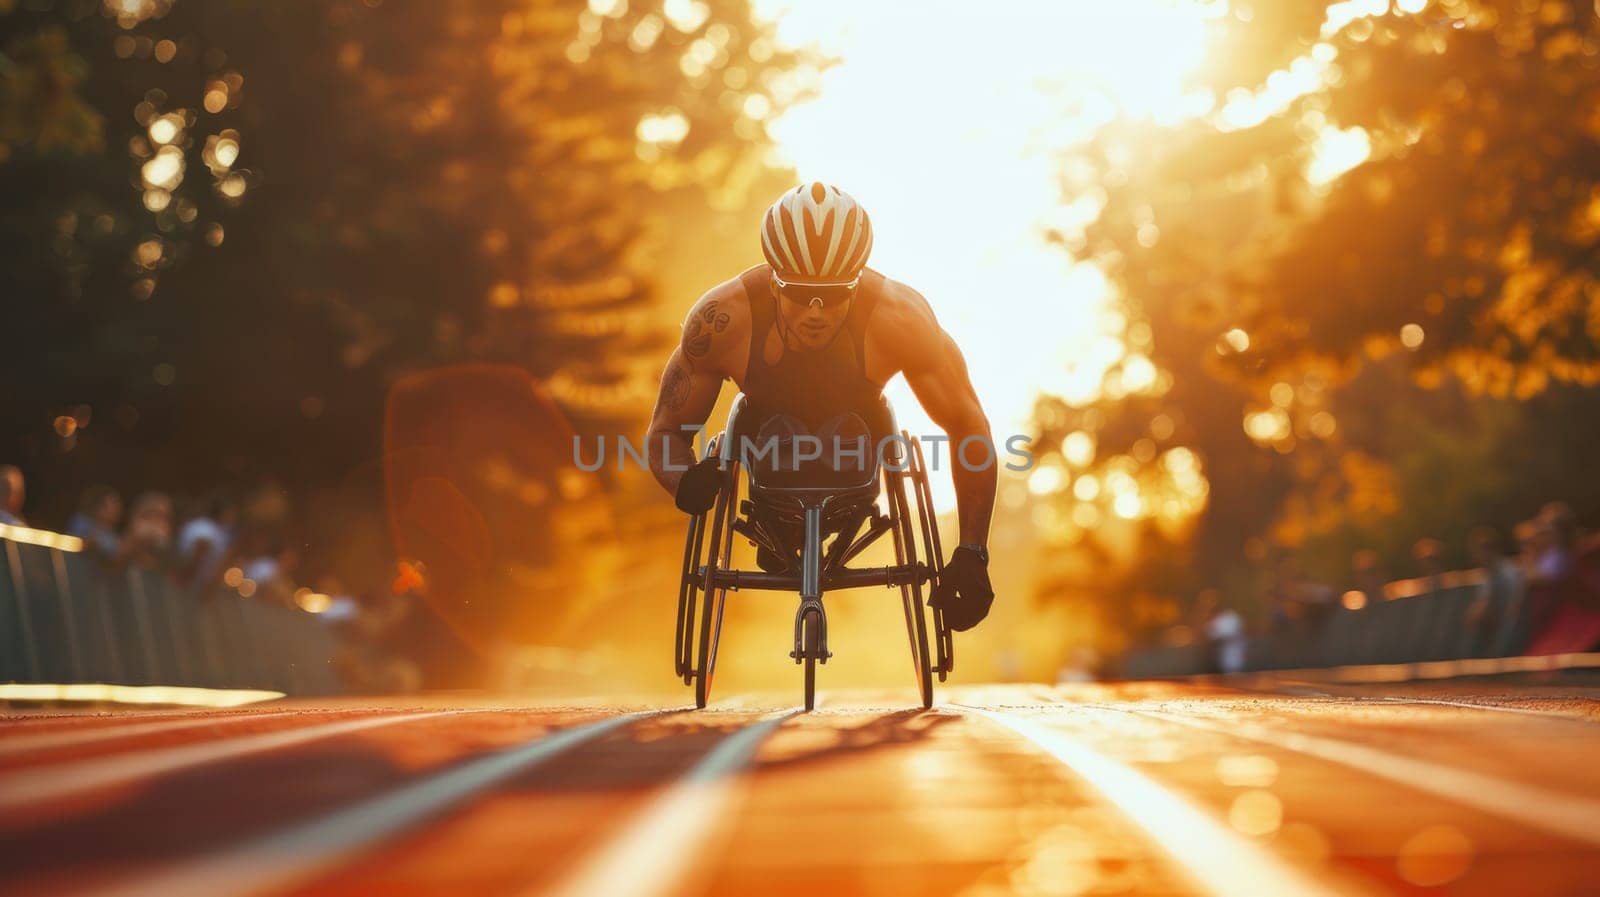 A man in a wheelchair is racing down a street, Paralympic concept.